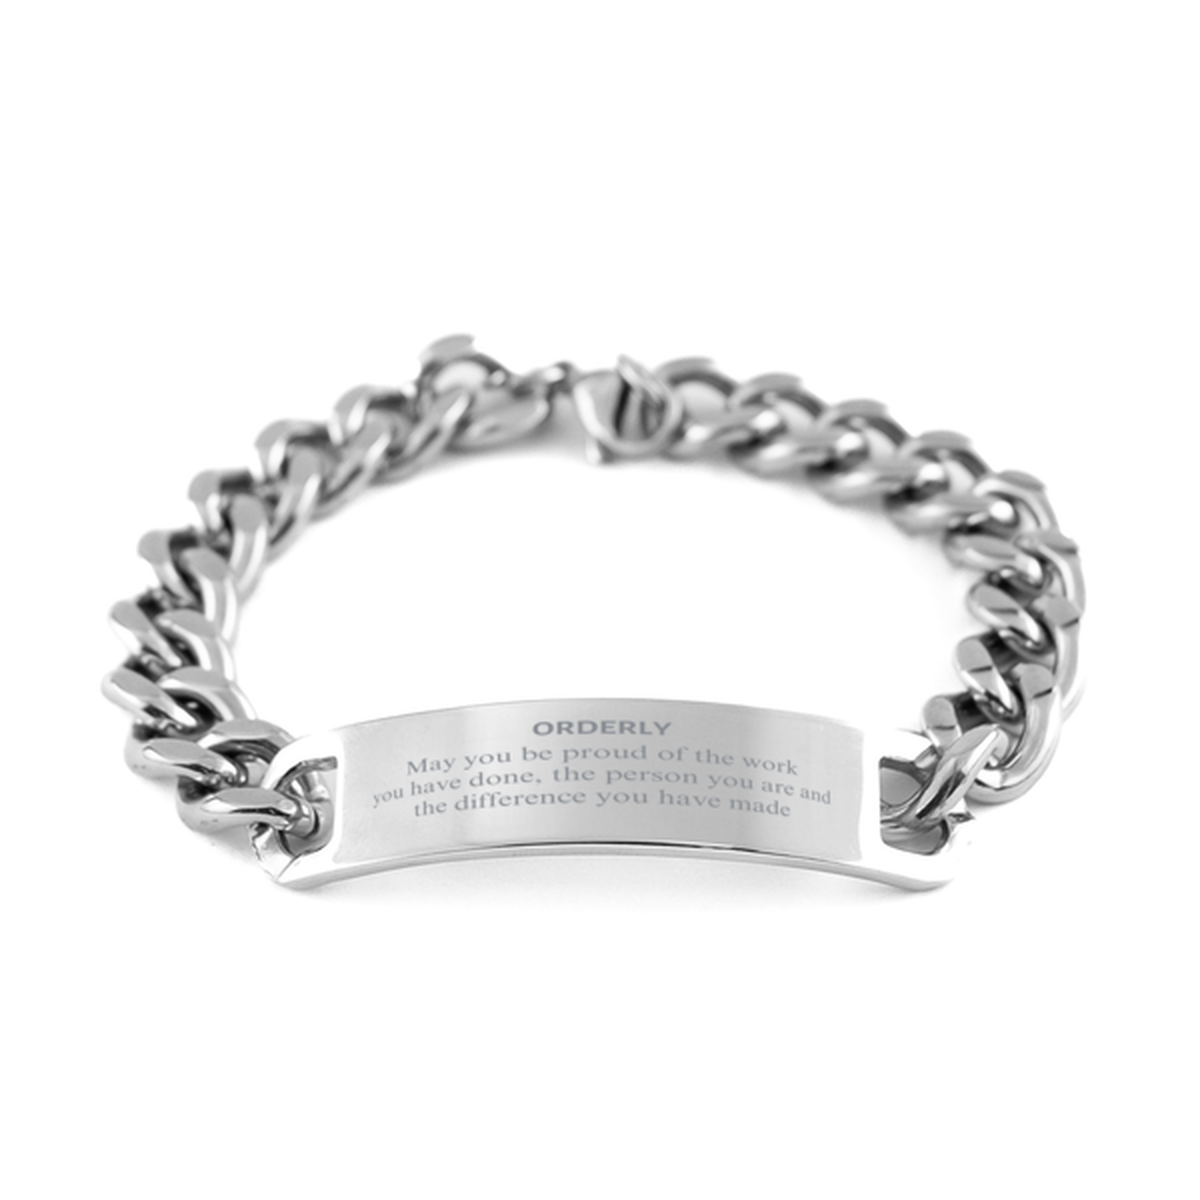 Orderly May you be proud of the work you have done, Retirement Orderly Cuban Chain Stainless Steel Bracelet for Colleague Appreciation Gifts Amazing for Orderly